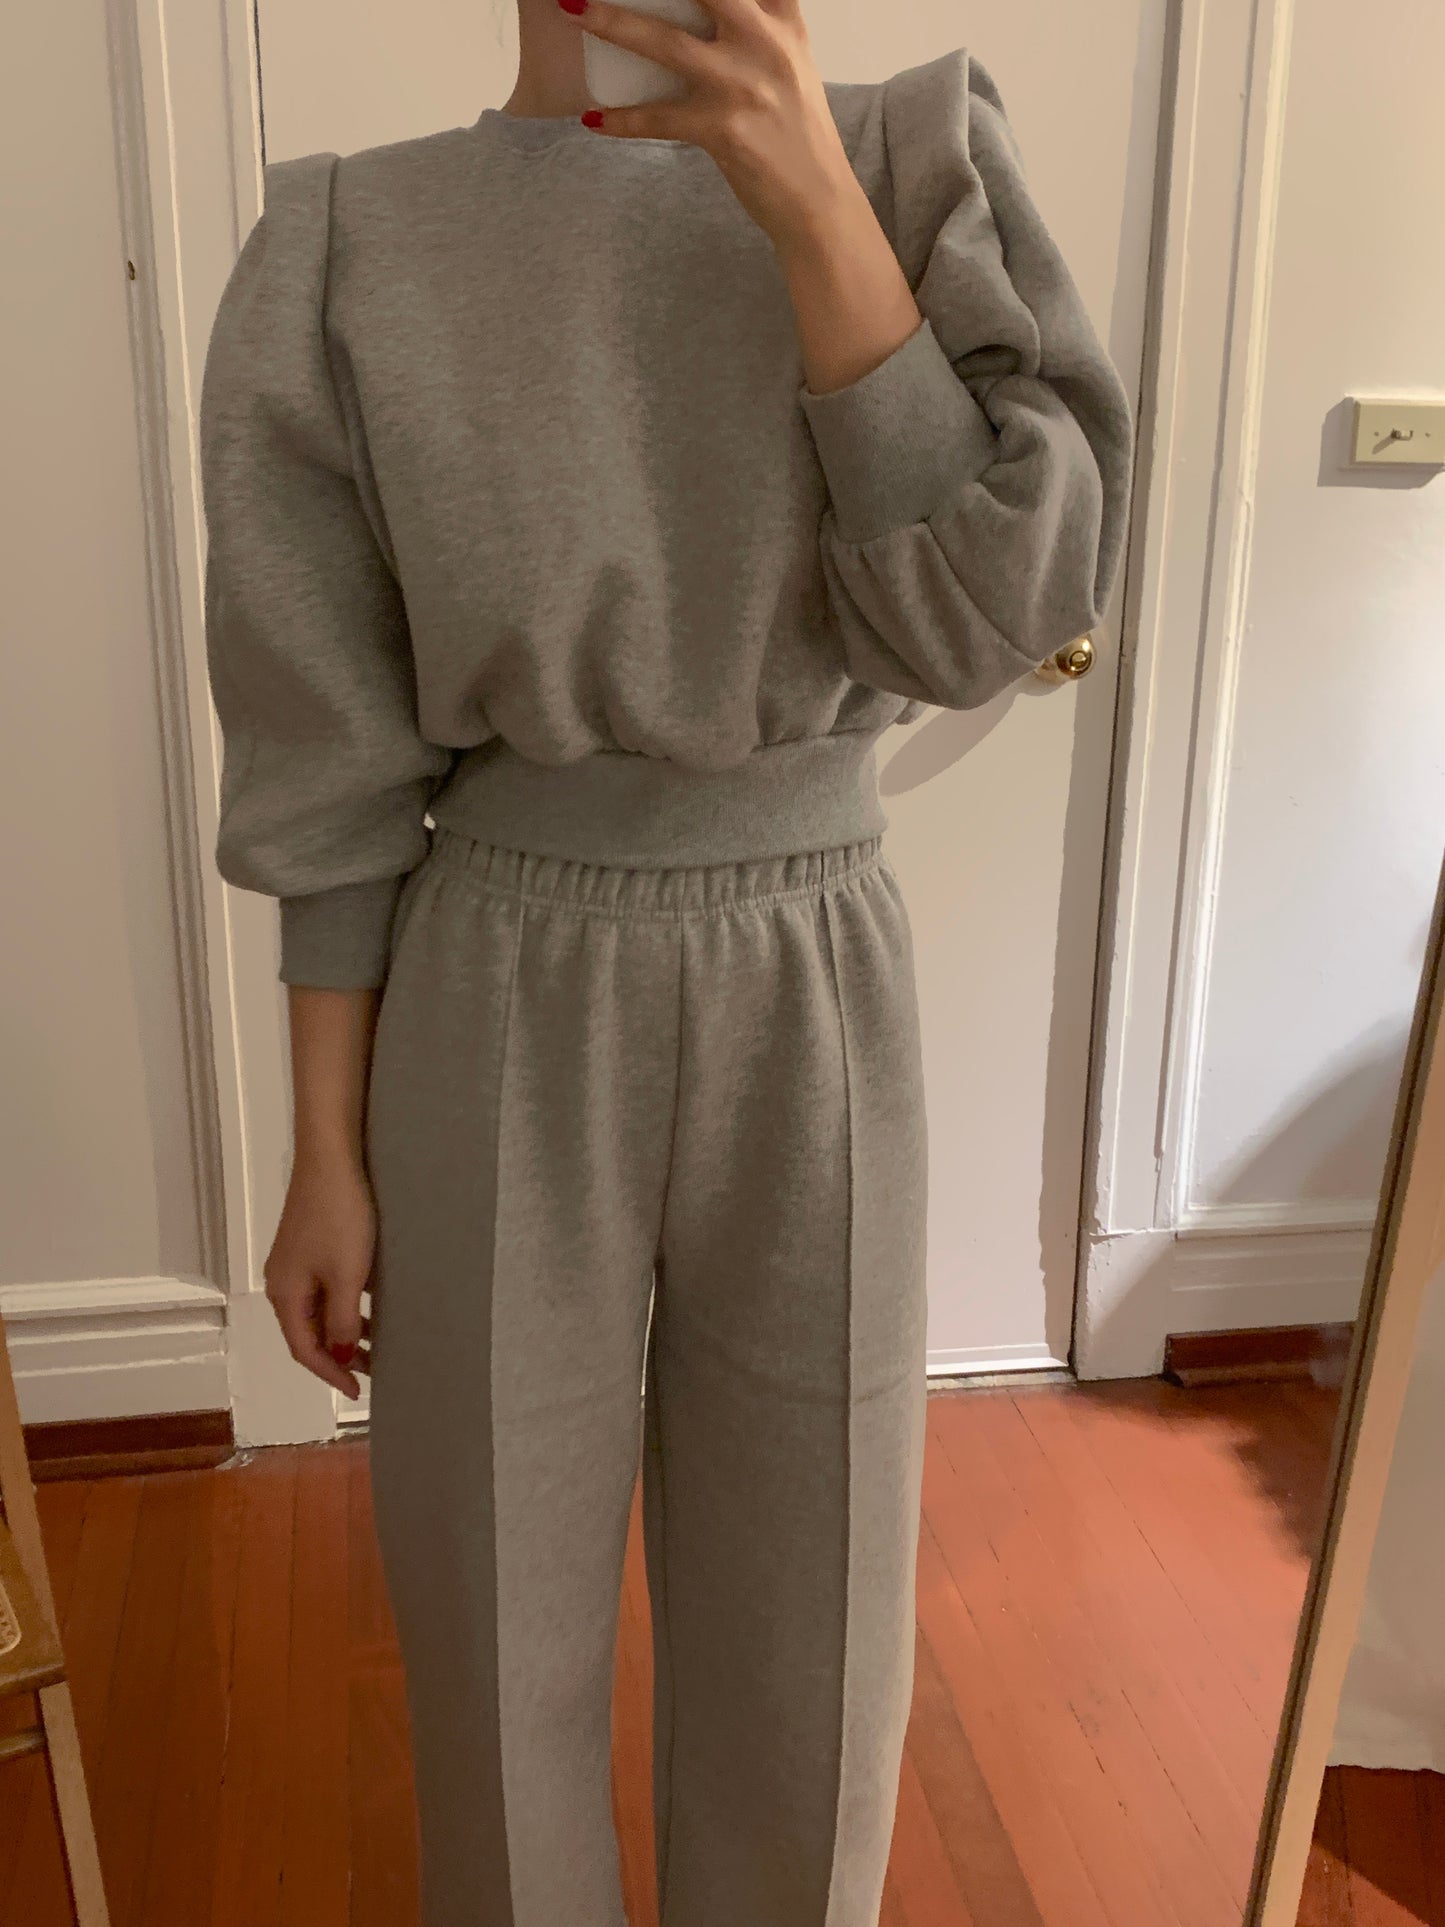 Fleece-lined Puff Cropped Set